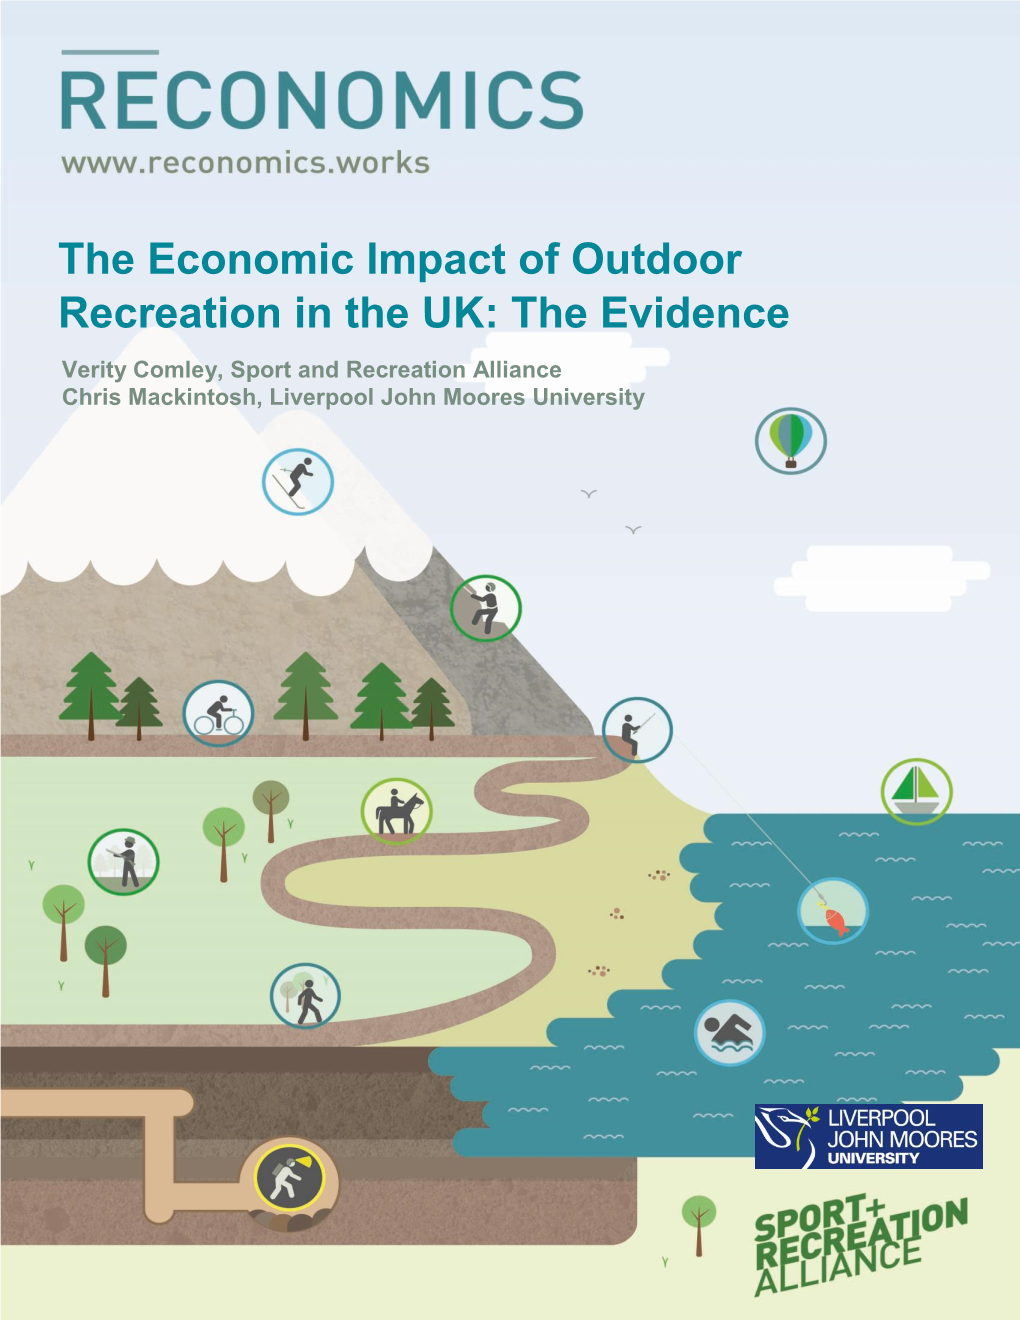 The Economic Impact of Outdoor Recreation in the UK: the Evidence